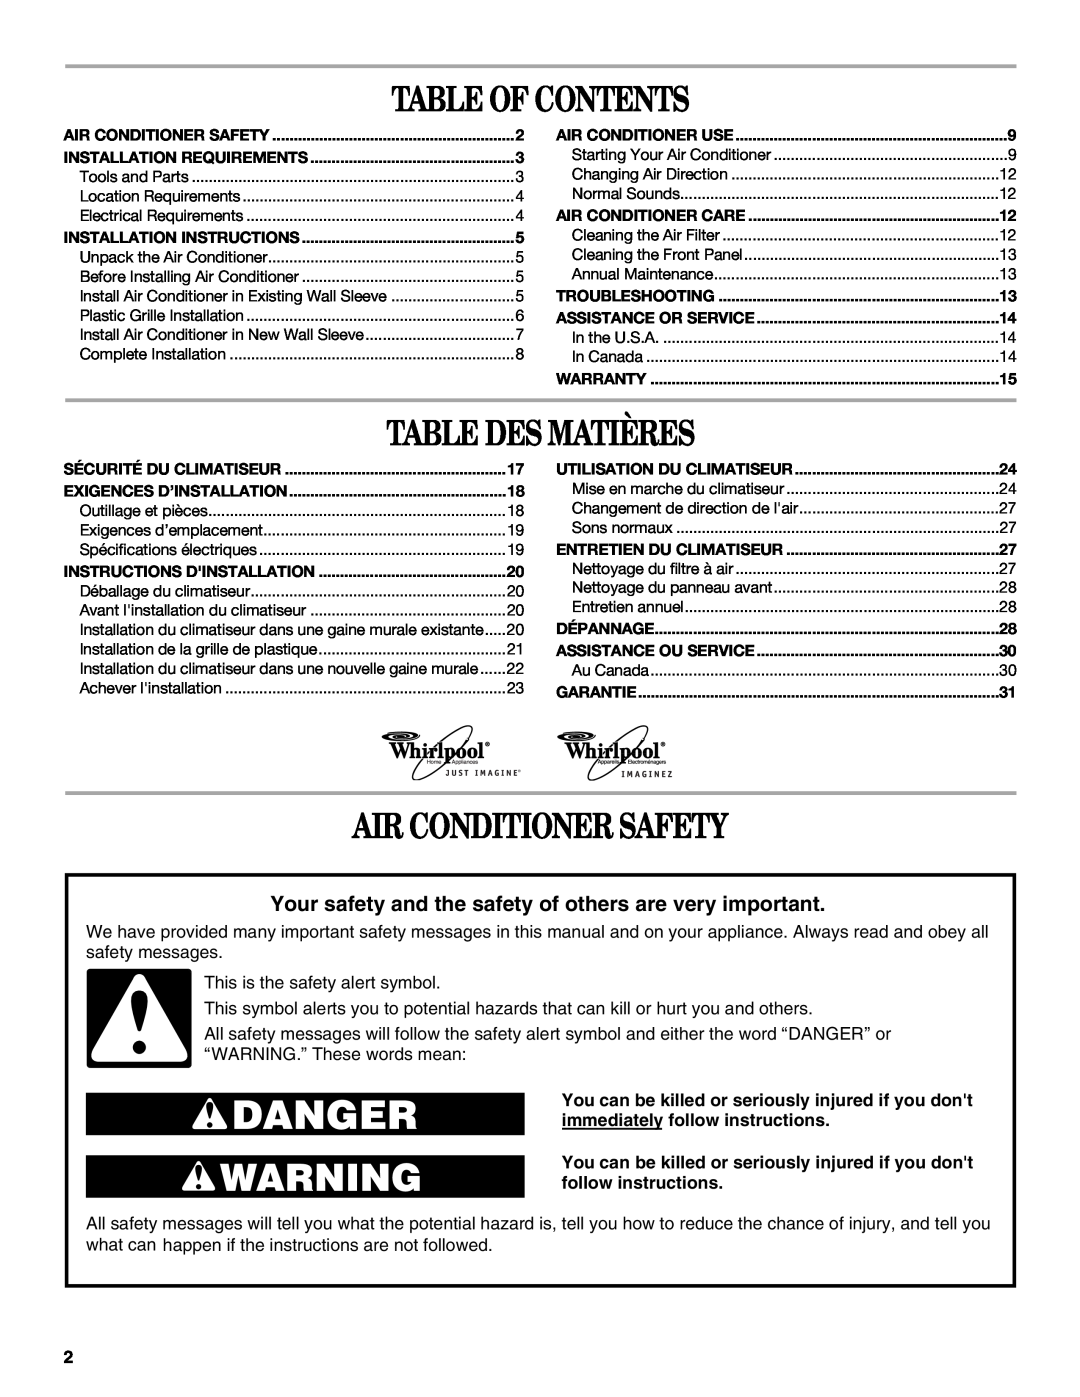 Whirlpool 1188177, 819041994 manual Table Of Contents, Table Des Matières, Air Conditioner Safety 